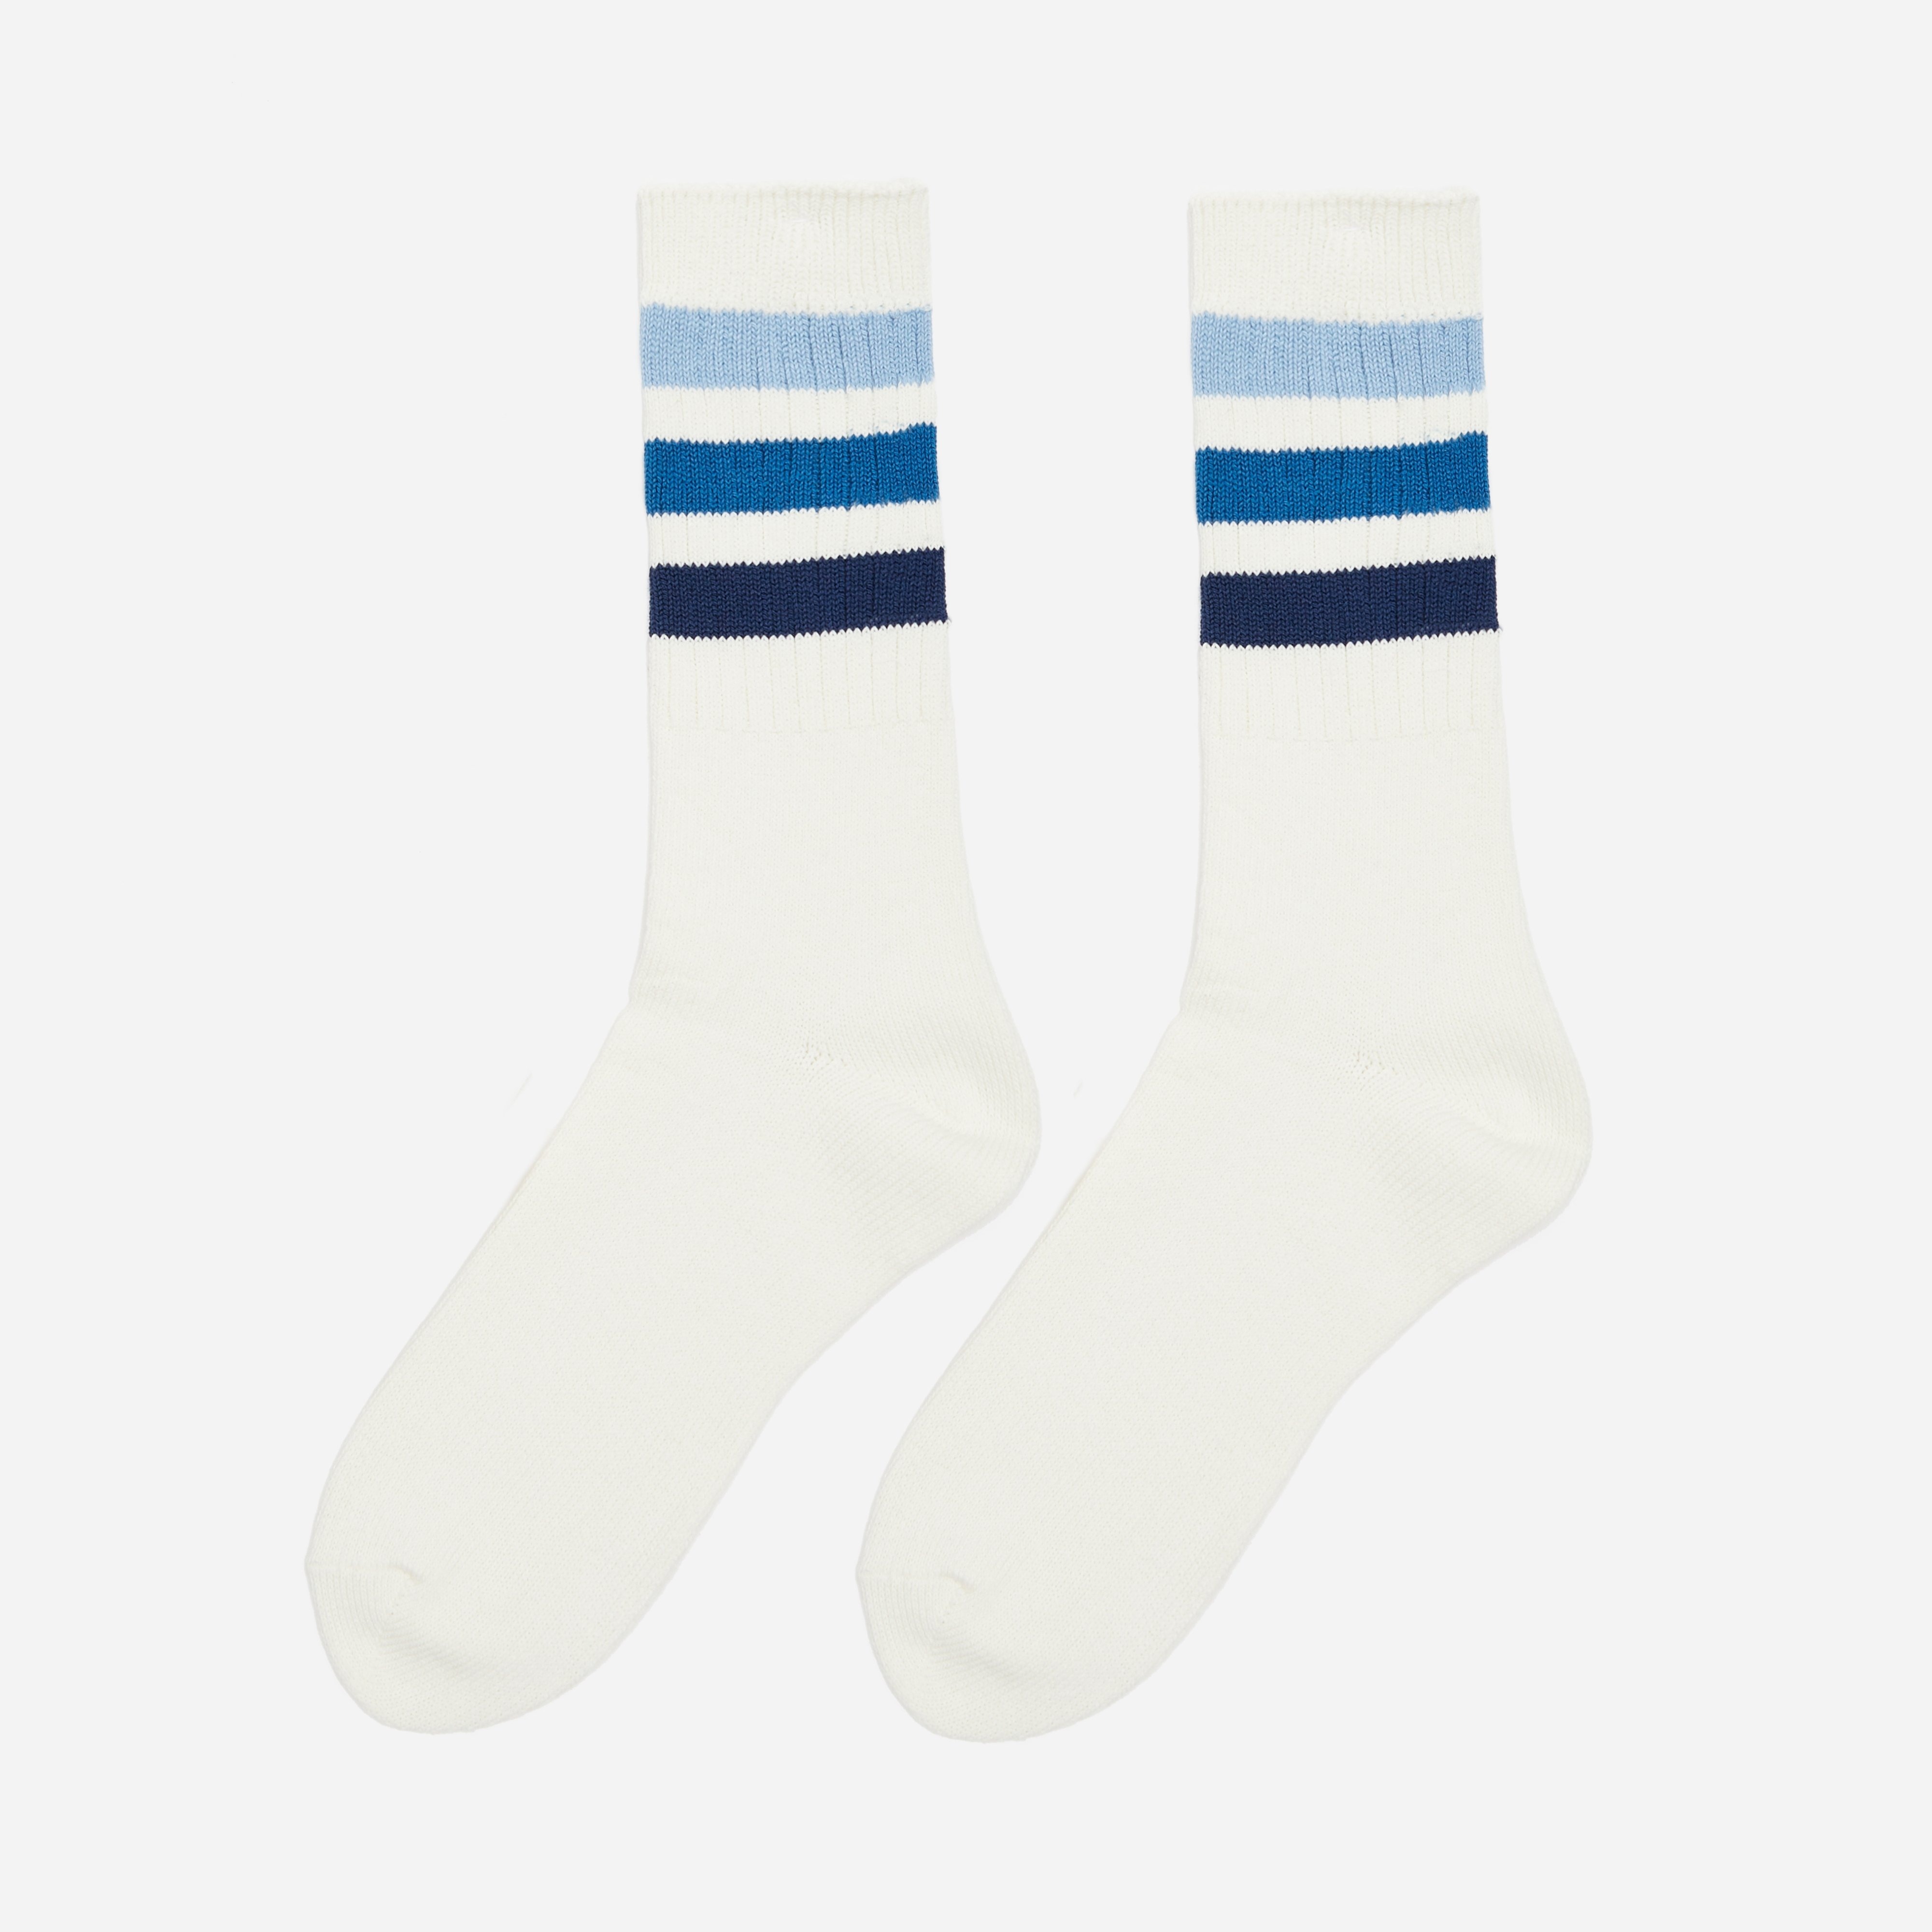 Anonymous Ism Recover 3 Line Crew Sock - 1